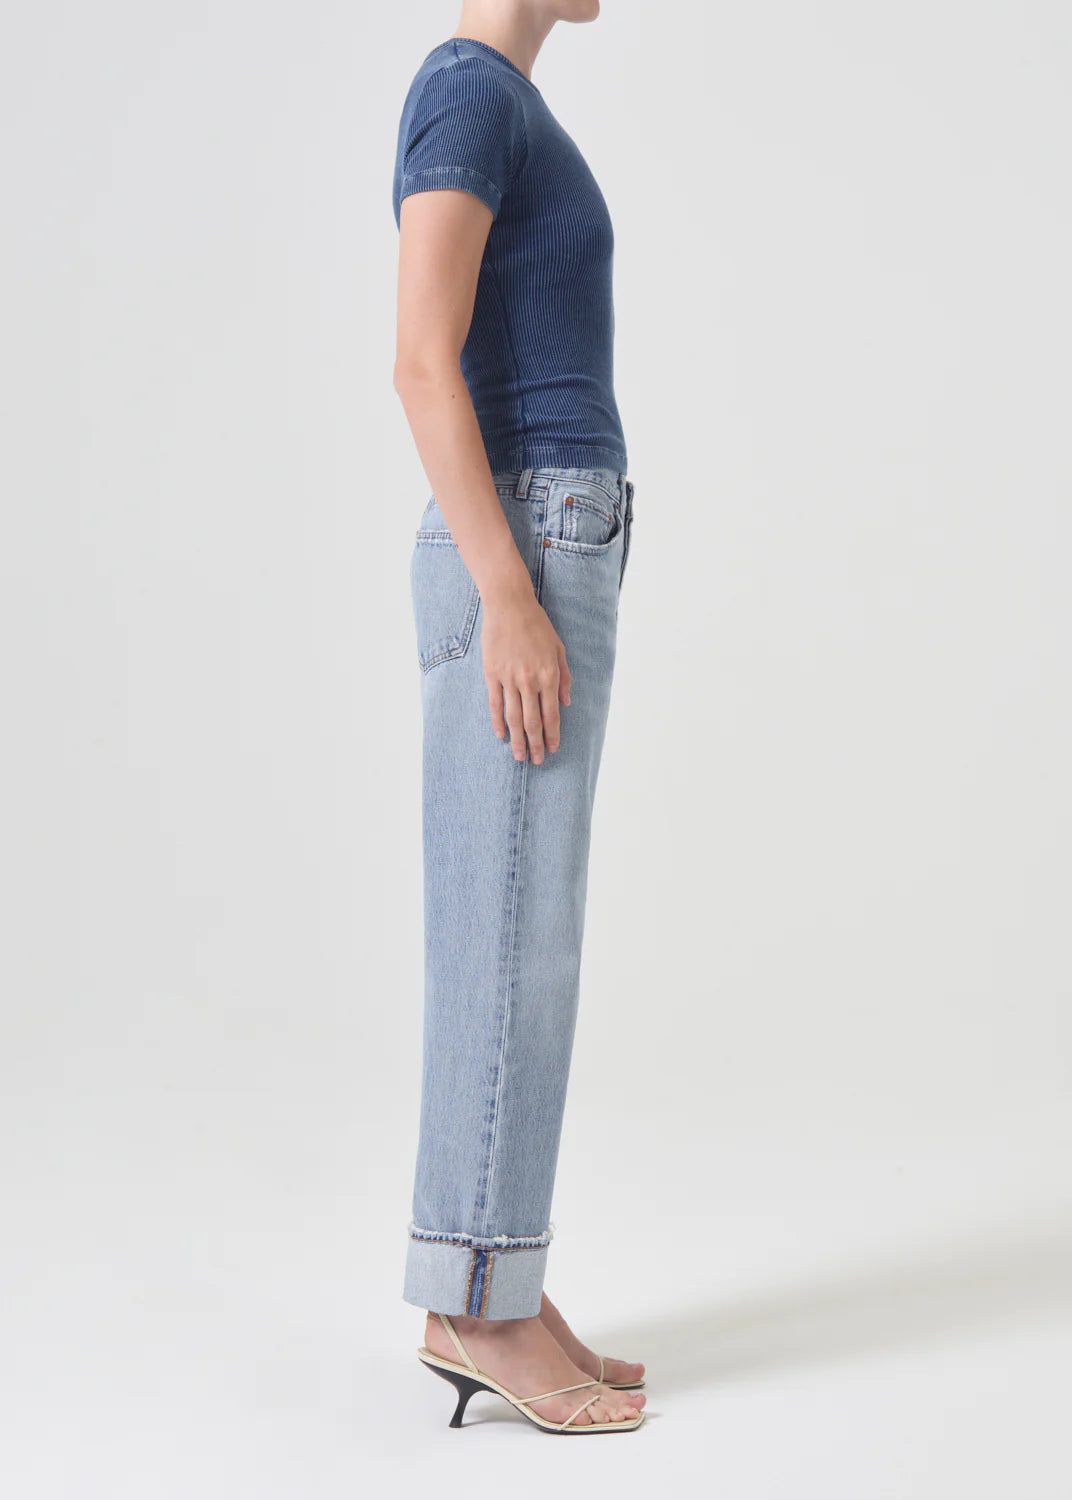 A woman wearing the AGOLDE Fran Low Slung Straight - Force blue t-shirt and jeans.